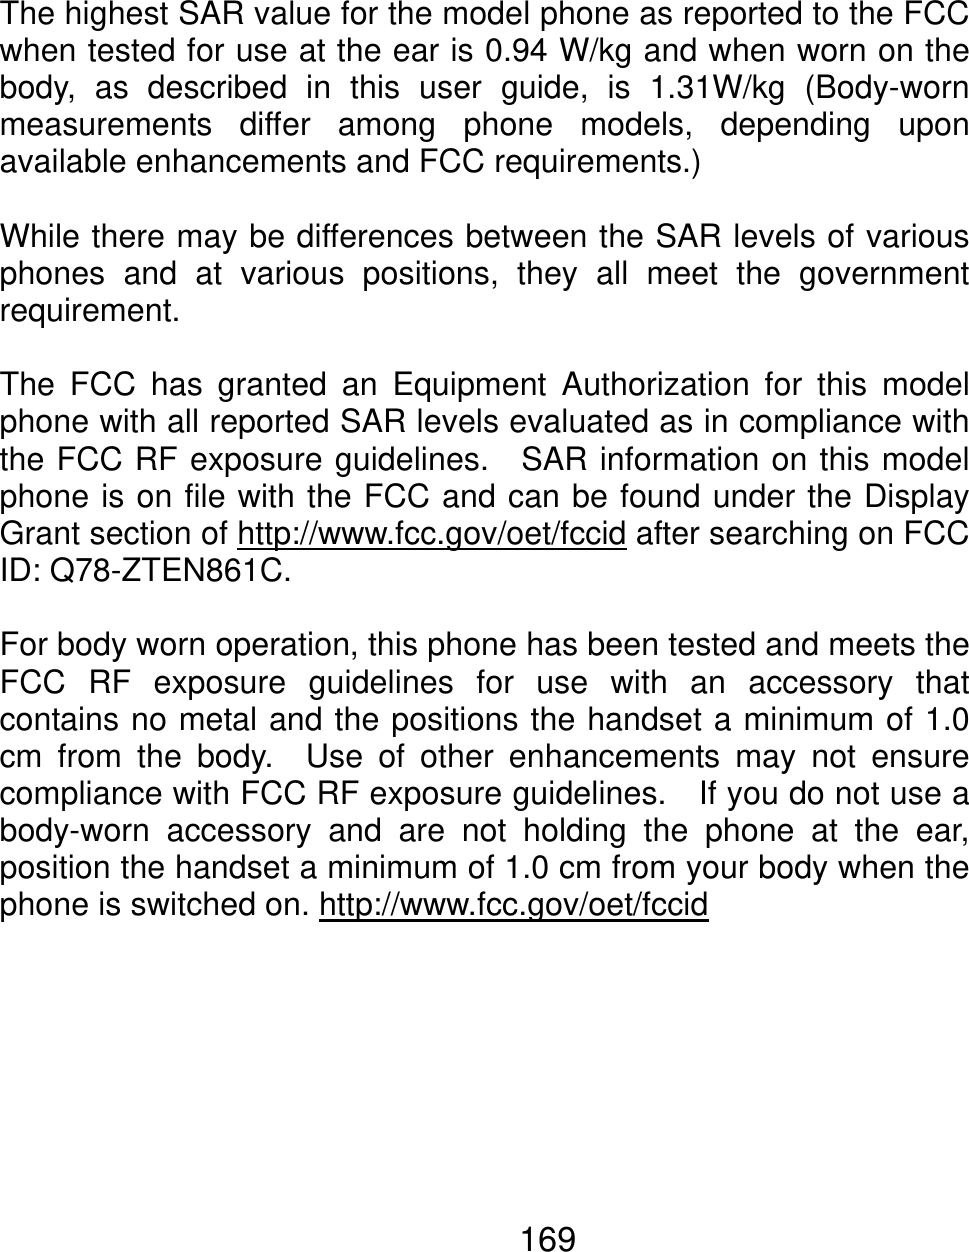 The highest SAR value for the model phone as reported to the FCCwhen tested for use at the ear is 0.94 W/kg and when worn on the body, as described in this user guide, is 1.31W/kg (Body-worn measurements differ among phone models, depending uponavailable enhancements and FCC requirements.)  While there may be differences between the SAR levels of variousphones and at various positions, they all meet the governmentrequirement.  The FCC has granted an Equipment Authorization for this modelphone with all reported SAR levels evaluated as in compliance withthe FCC RF exposure guidelines.  SAR information on this model phone is on file with the FCC and can be found under the DisplayGrant section of http://www.fcc.gov/oet/fccid after searching on FCC ID: Q78-ZTEN861C.  For body worn operation, this phone has been tested and meets theFCC RF exposure guidelines for use with an accessory thatcontains no metal and the positions the handset a minimum of 1.0cm from the body.  Use of other enhancements may not ensurecompliance with FCC RF exposure guidelines.    If you do not use abody-worn accessory and are not holding the phone at the ear,position the handset a minimum of 1.0 cm from your body when the phone is switched on. http://www.fcc.gov/oet/fccid   169 